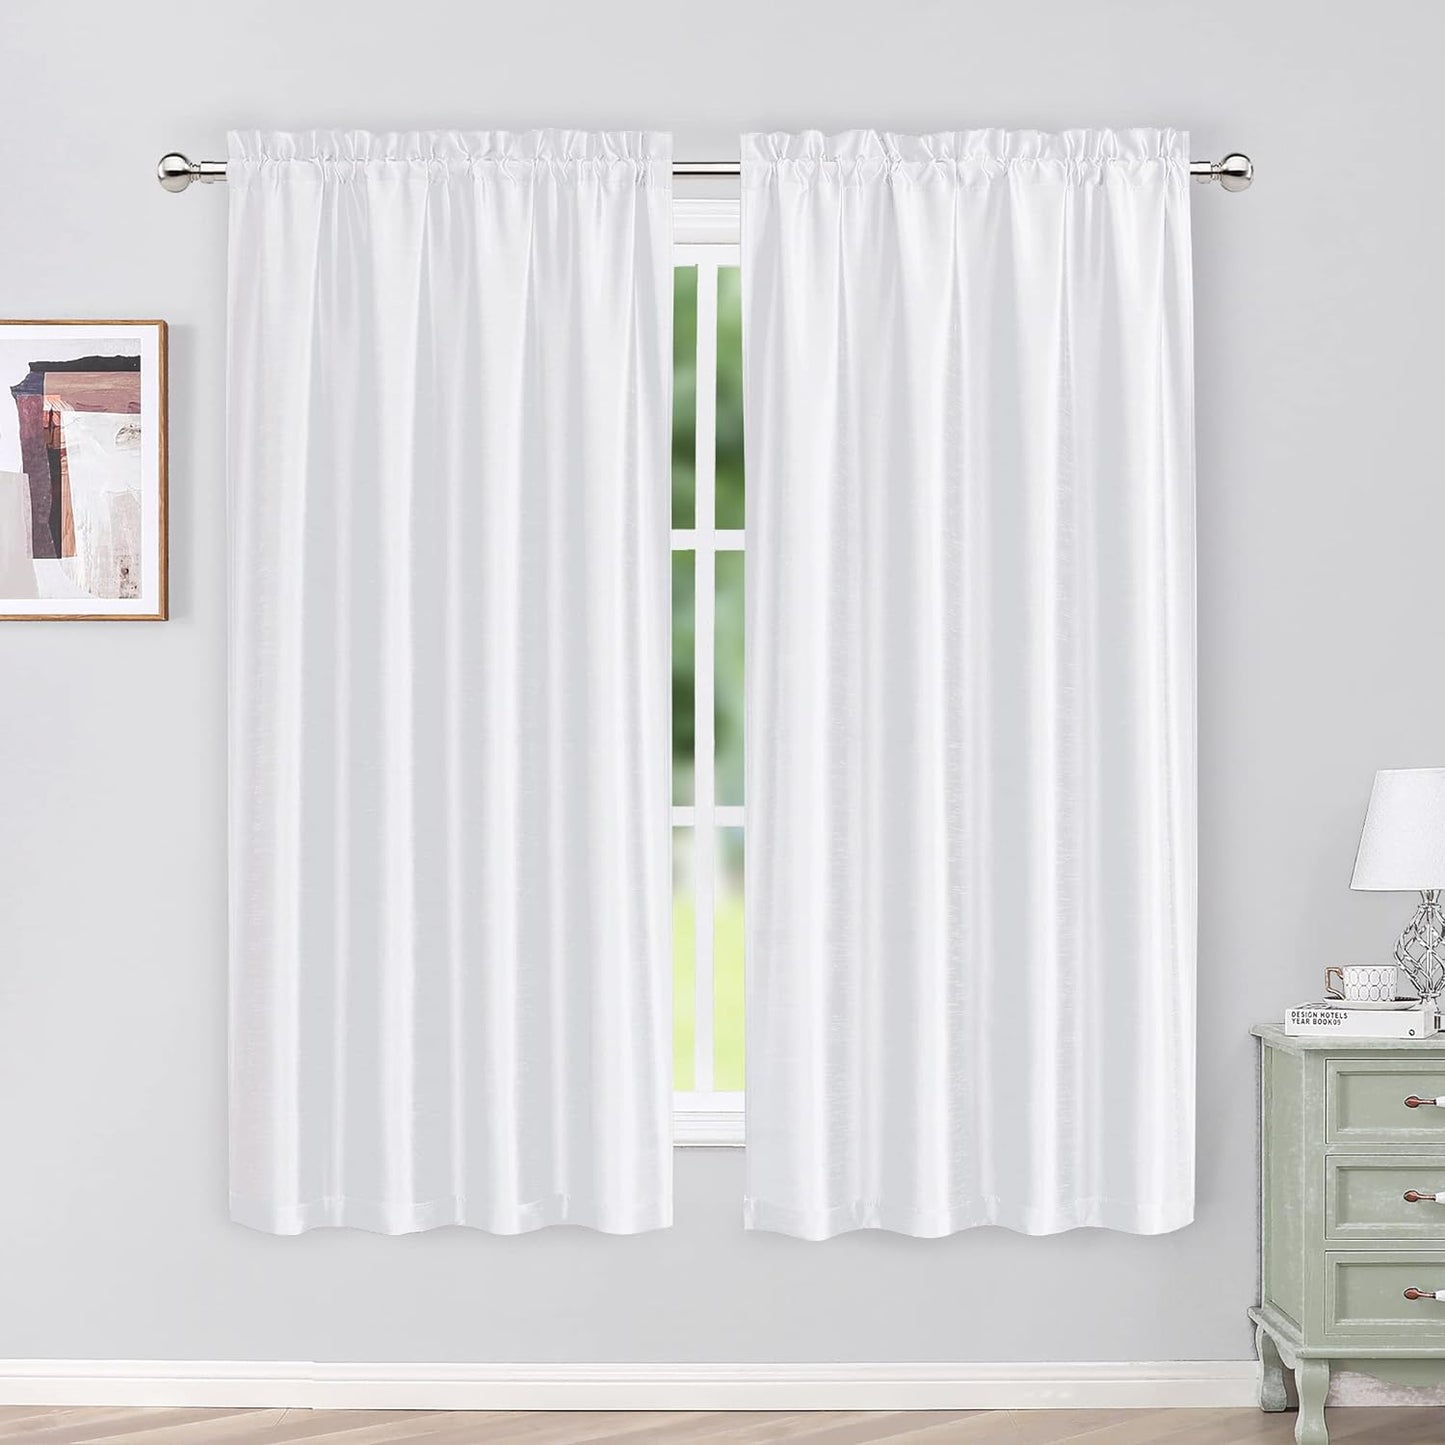 Chyhomenyc Uptown Sage Green Kitchen Curtains 45 Inch Length 2 Panels, Room Darkening Faux Silk Chic Fabric Short Window Curtains for Bedroom Living Room, Each 30Wx45L  Chyhomenyc White 2X40"Wx63"L 